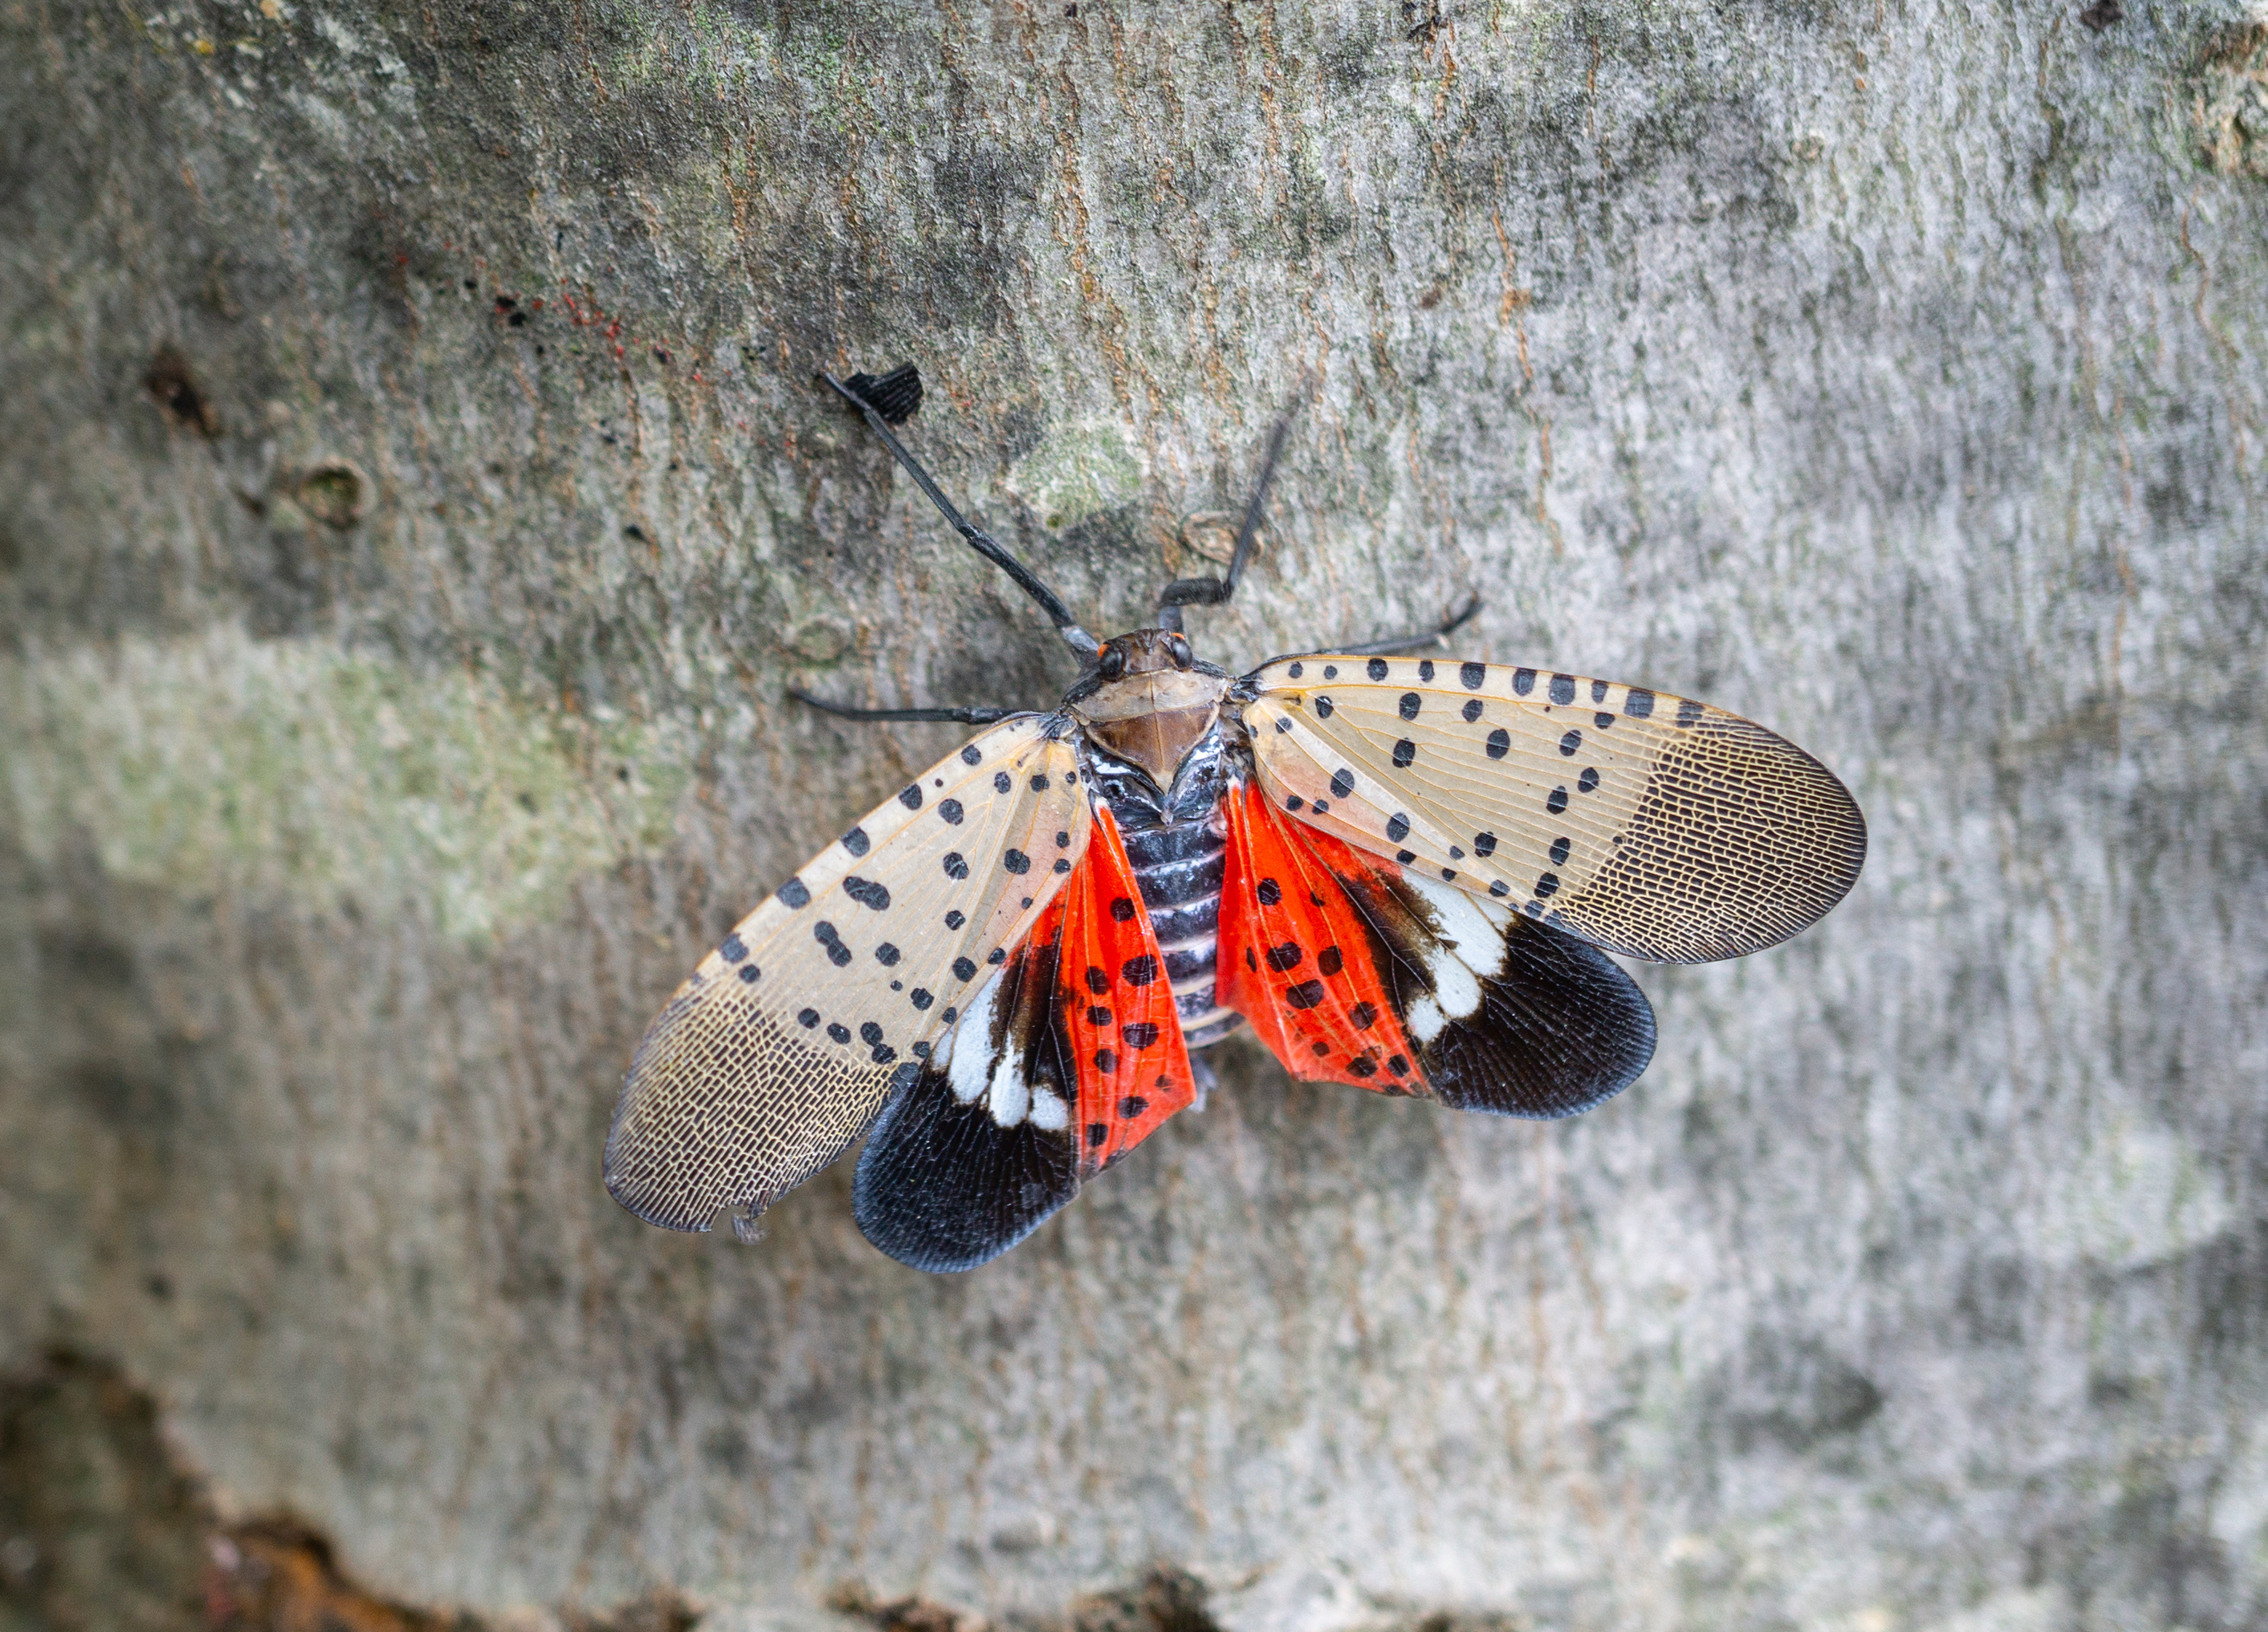 Are spotted lanternflies really that bad?